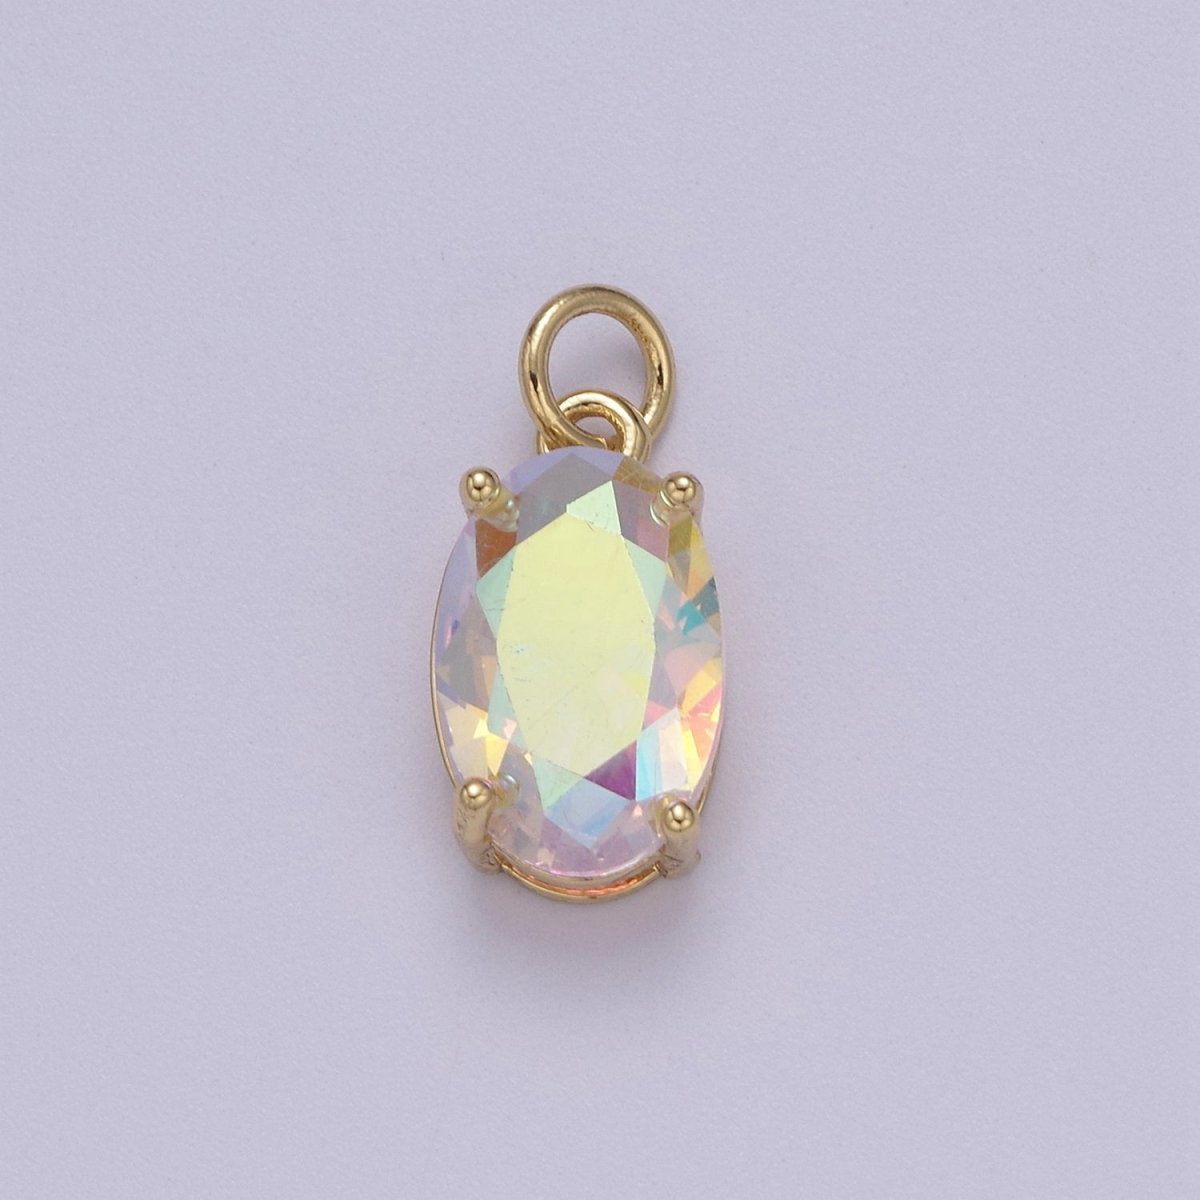 Dainty AB, Yellow, Blue, Teal, Green, Pink, Red CZ 24k Gold Filled Solitaire Micro Pave Pendant Oval Charm Stone Pendant for Birthstone Add on Charm C-798 C-802 C-842 C-843 C-845 C-847~C-852 C-854 - DLUXCA